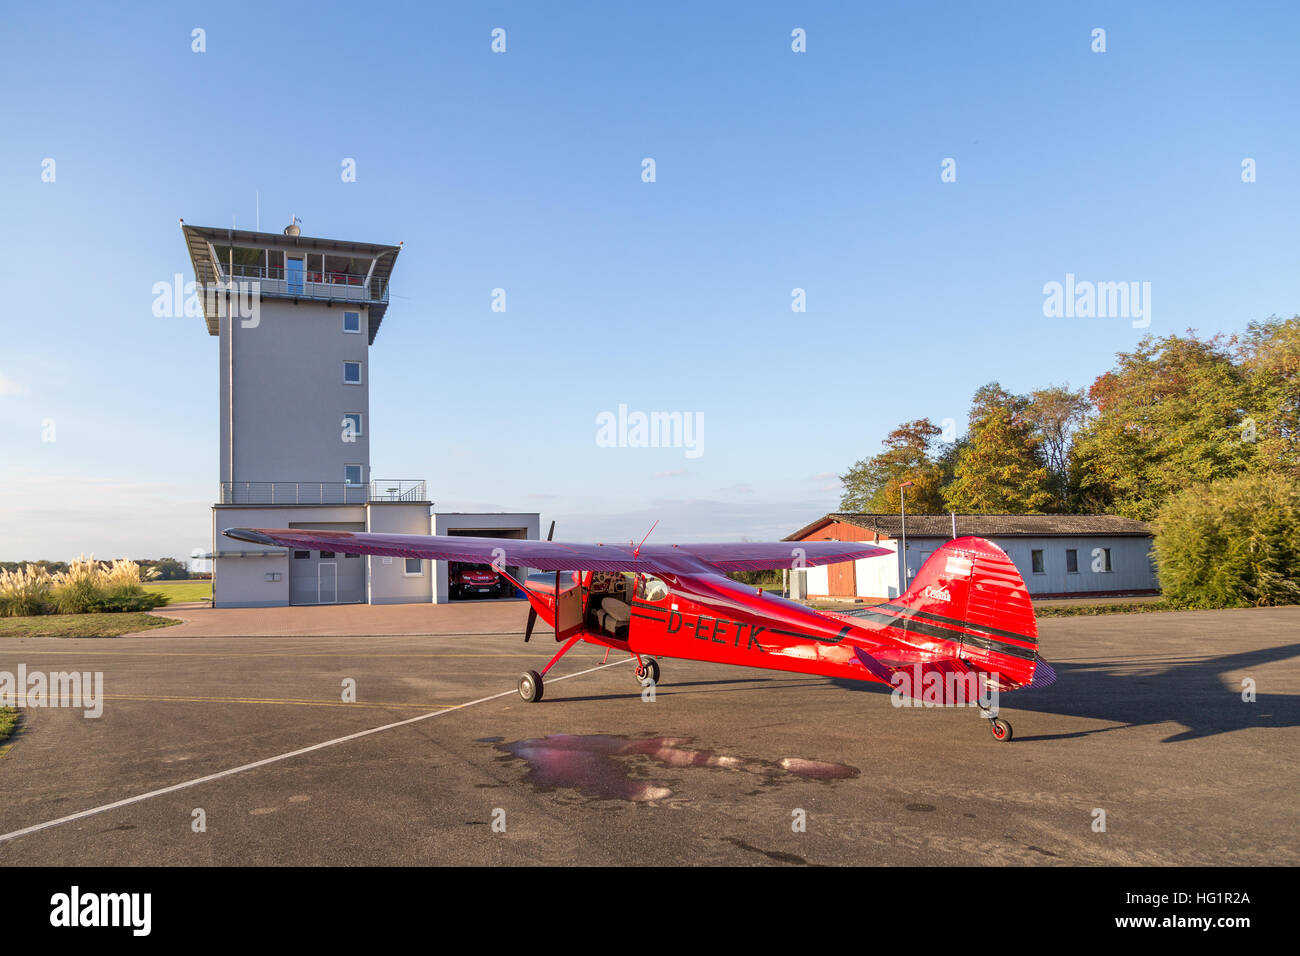 Bremgarten, Germany - October 22, 2016: A classic red Cessna 170 aircraft parked at the airport Stock Photo